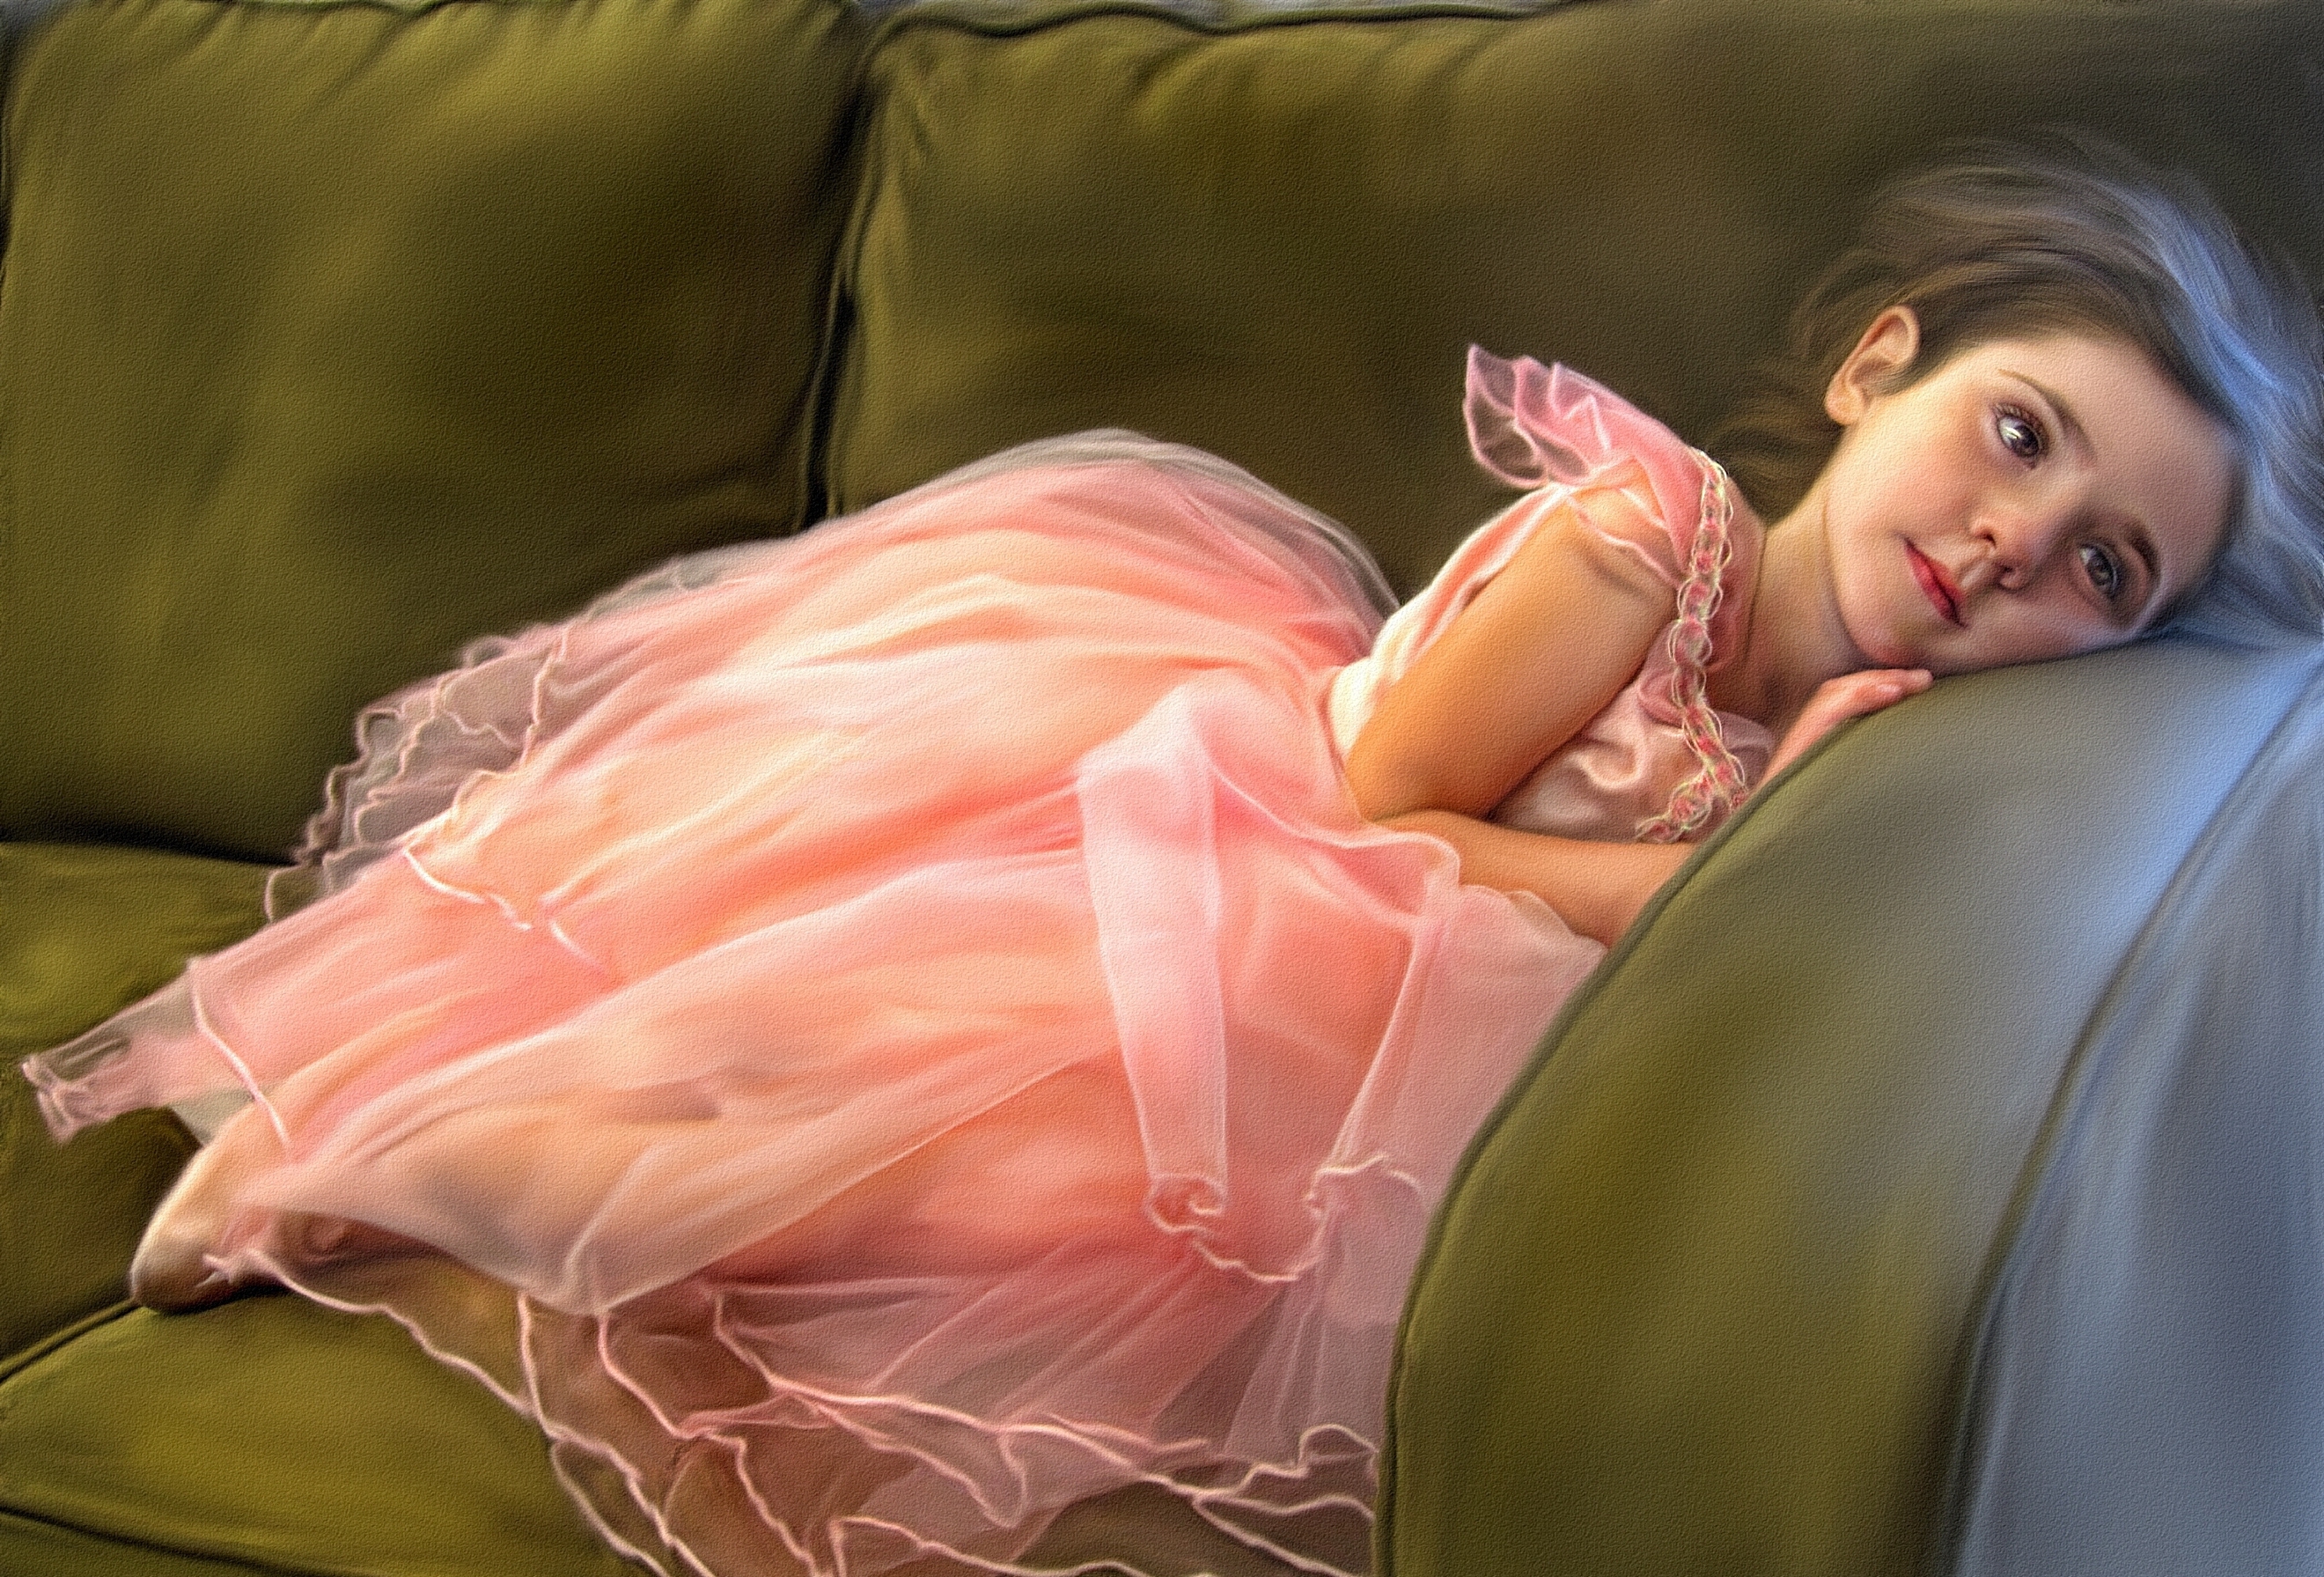 artistic, painting, couch, dress, little girl, pink, resting